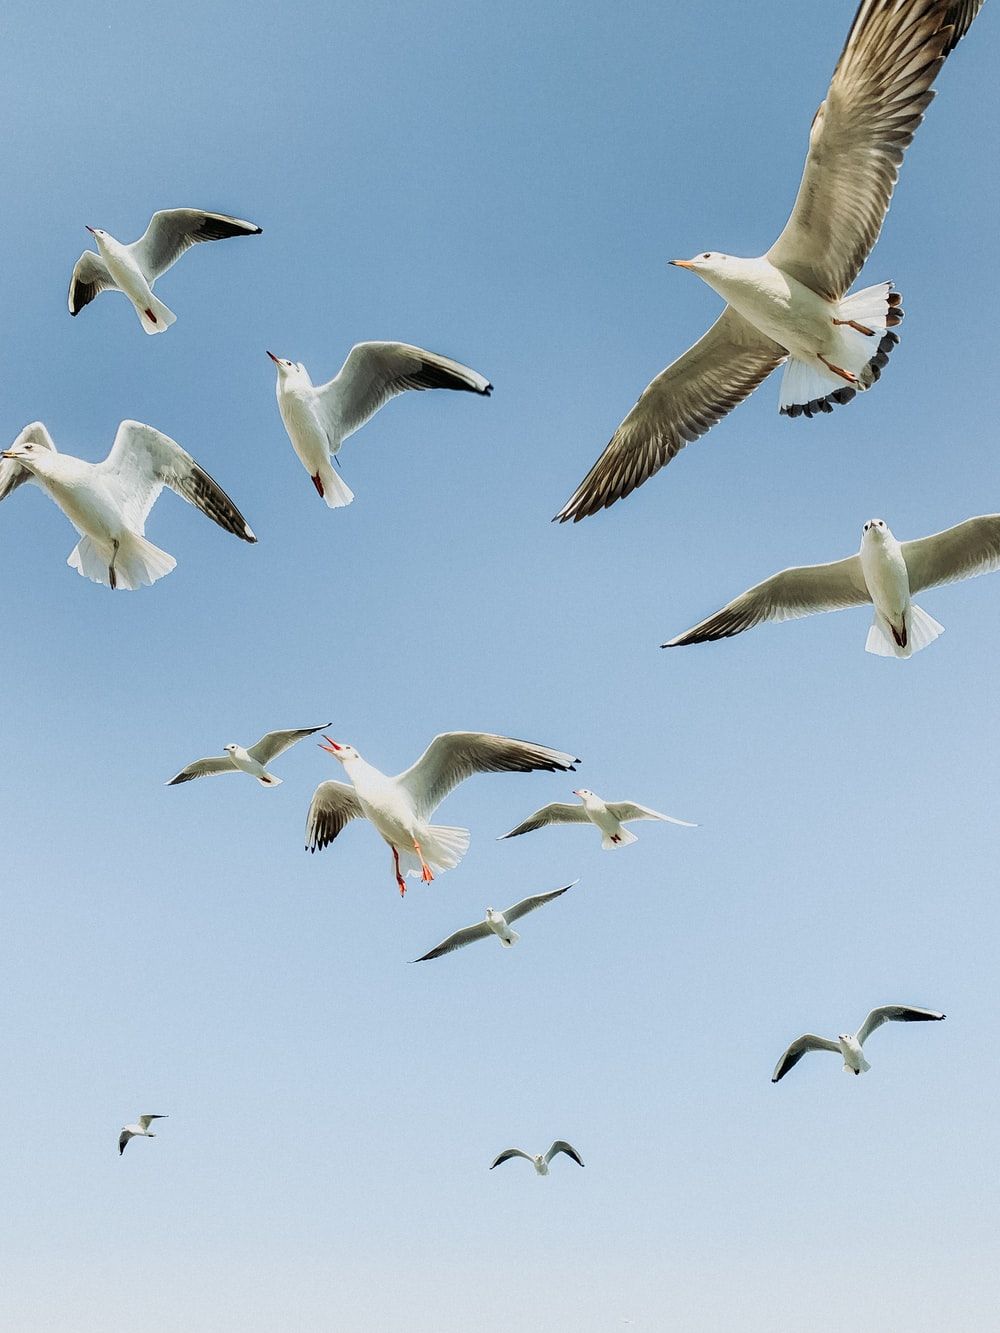 Flock Of Bird Picture. Download Free Image